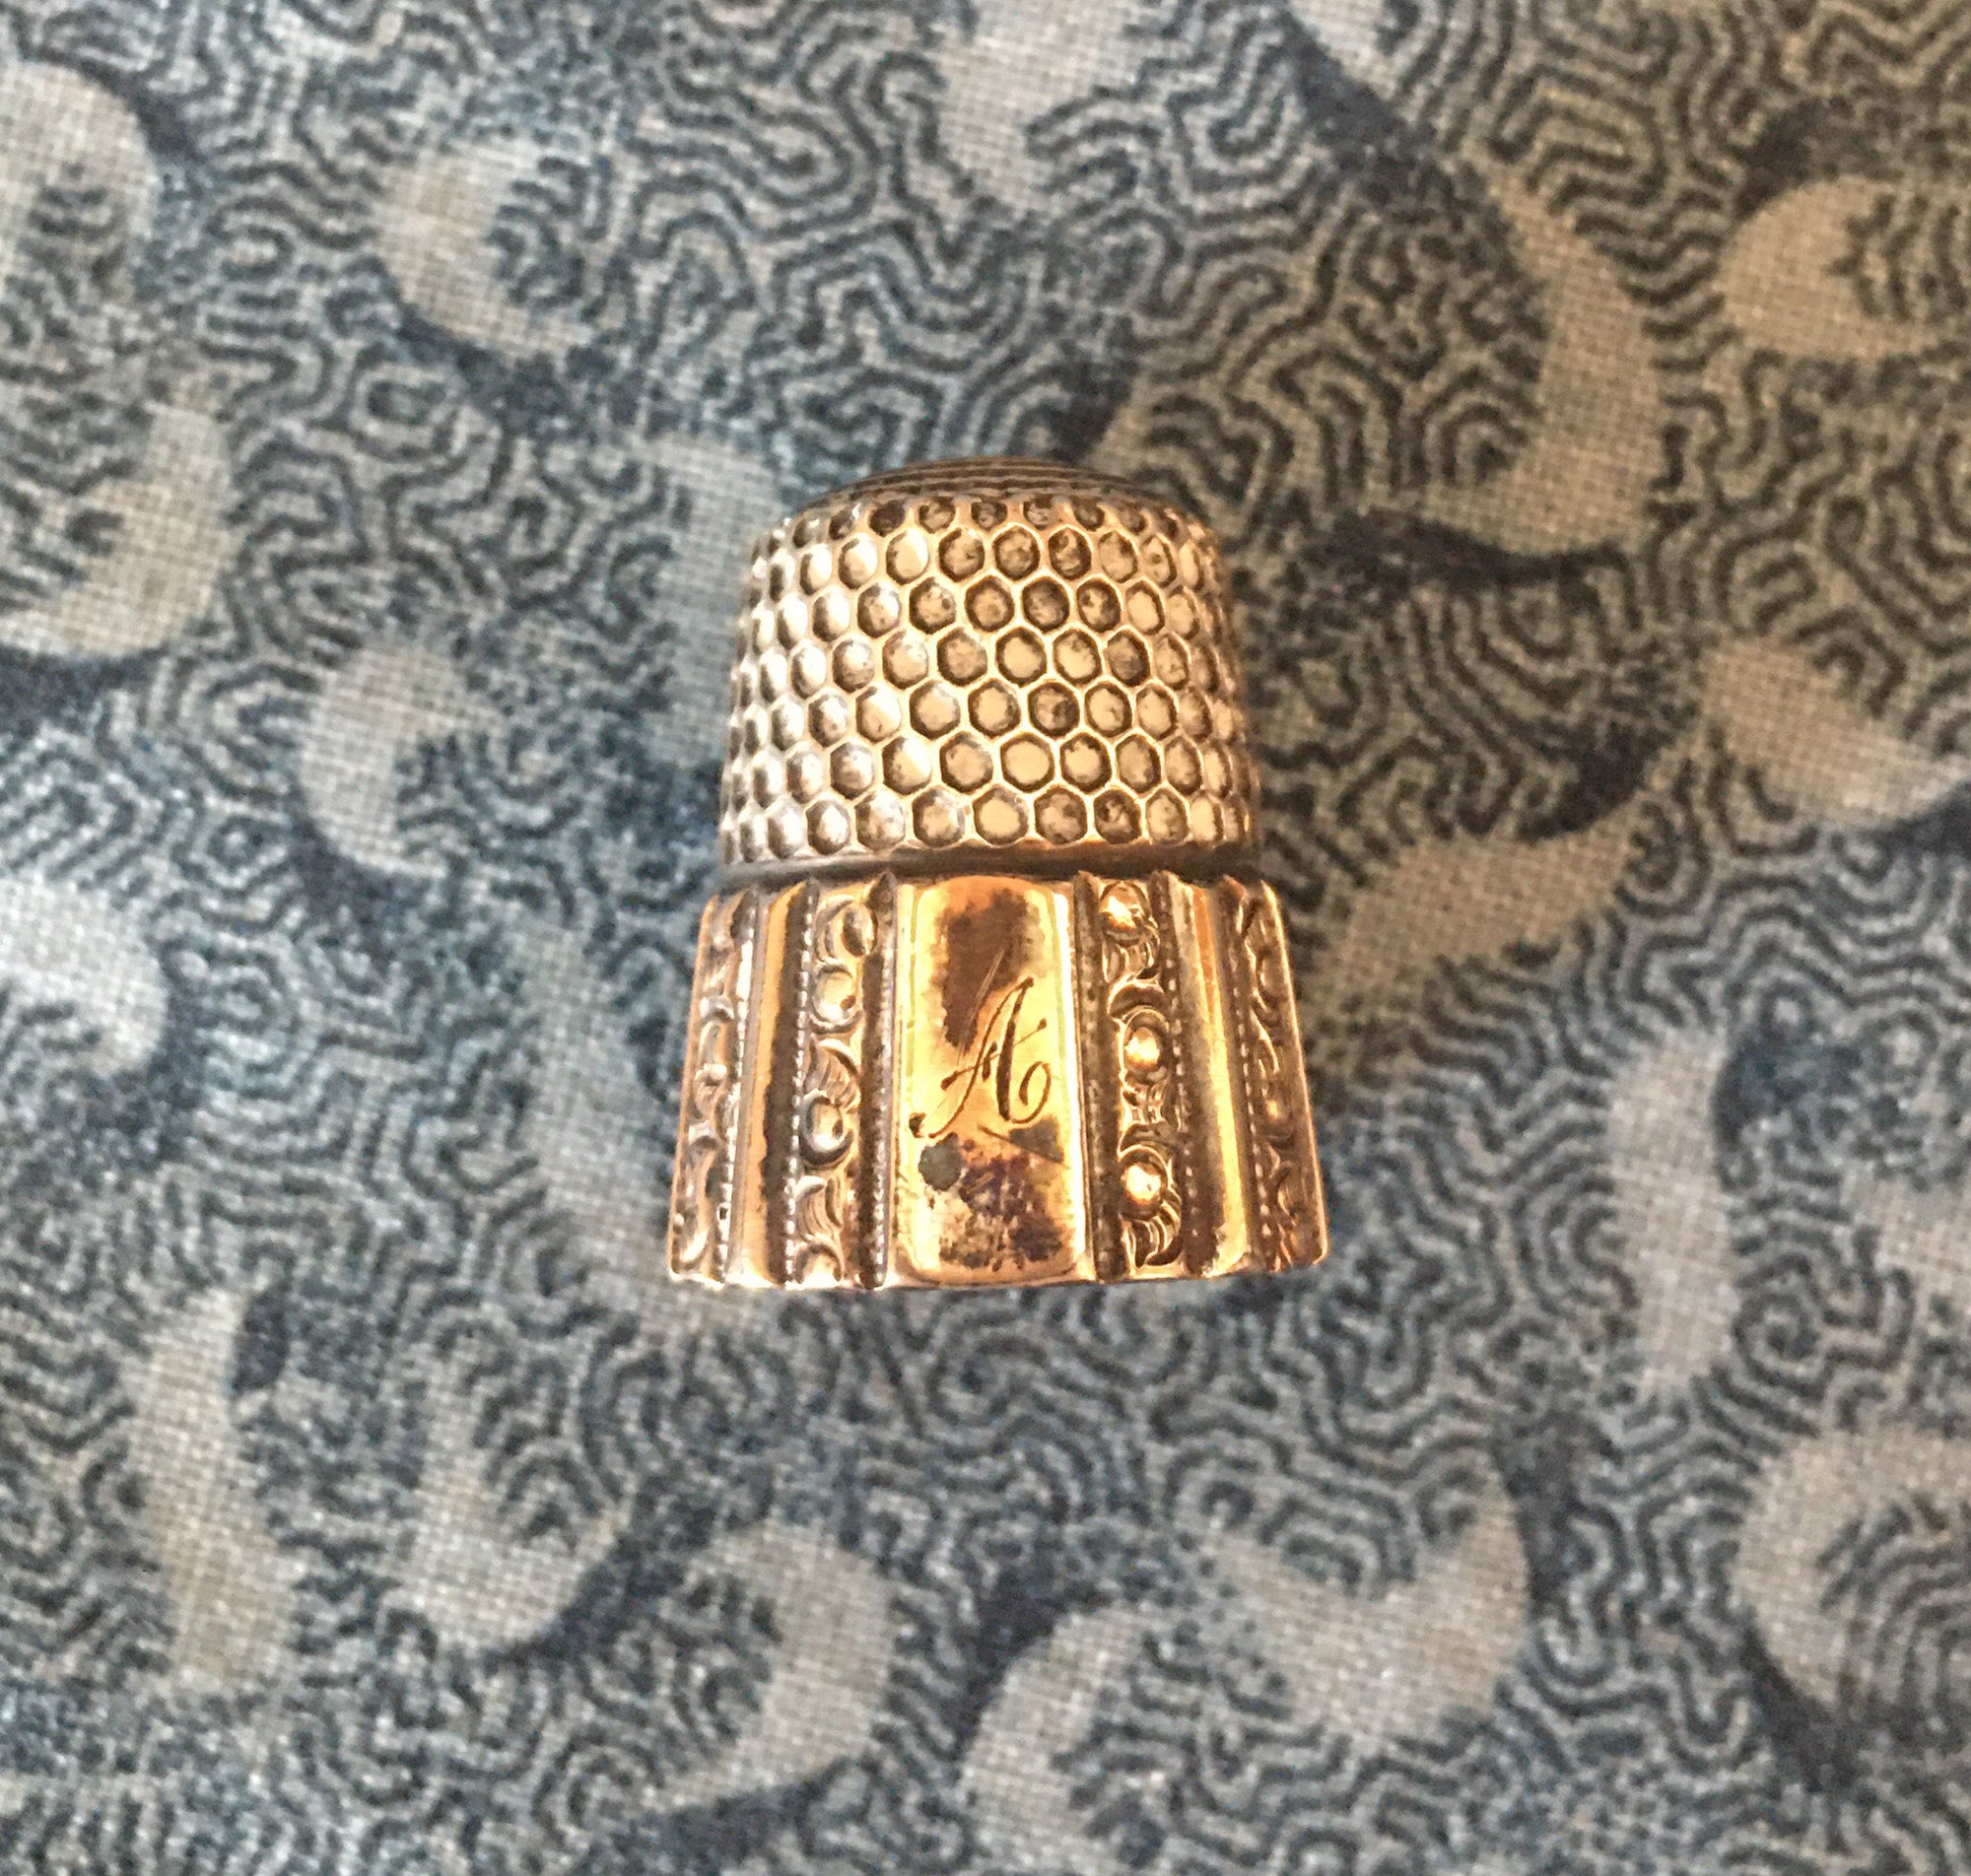 Vintage Hand Made Butterfly Pin Cushion with Sterling Silver, Gold Wash Thimble